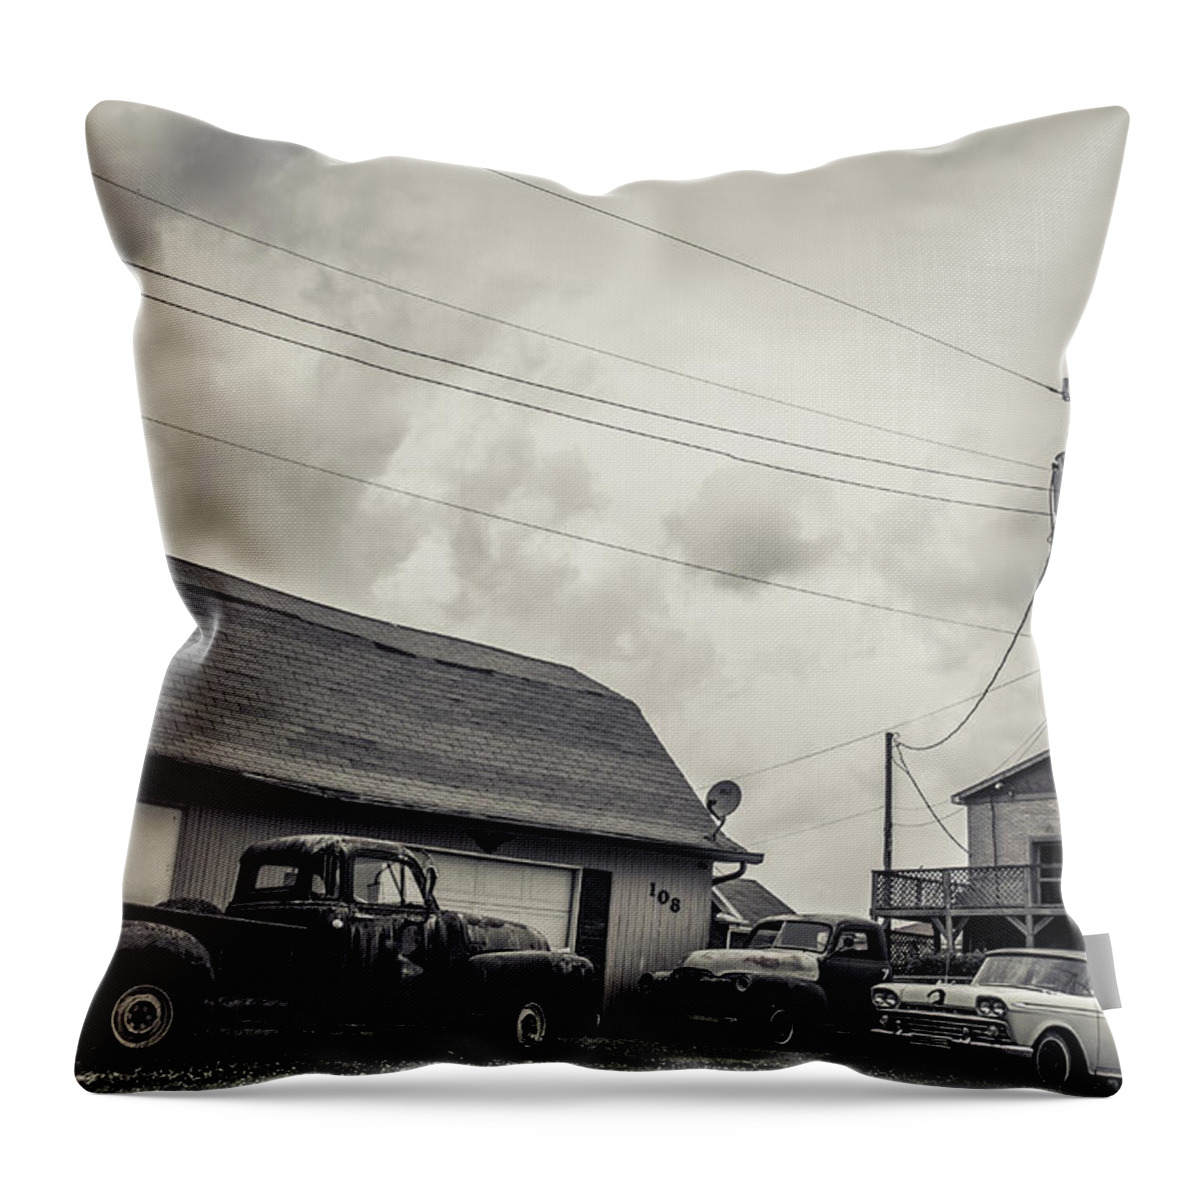 Vintage Throw Pillow featuring the photograph Then There Were 3 by Off The Beaten Path Photography - Andrew Alexander